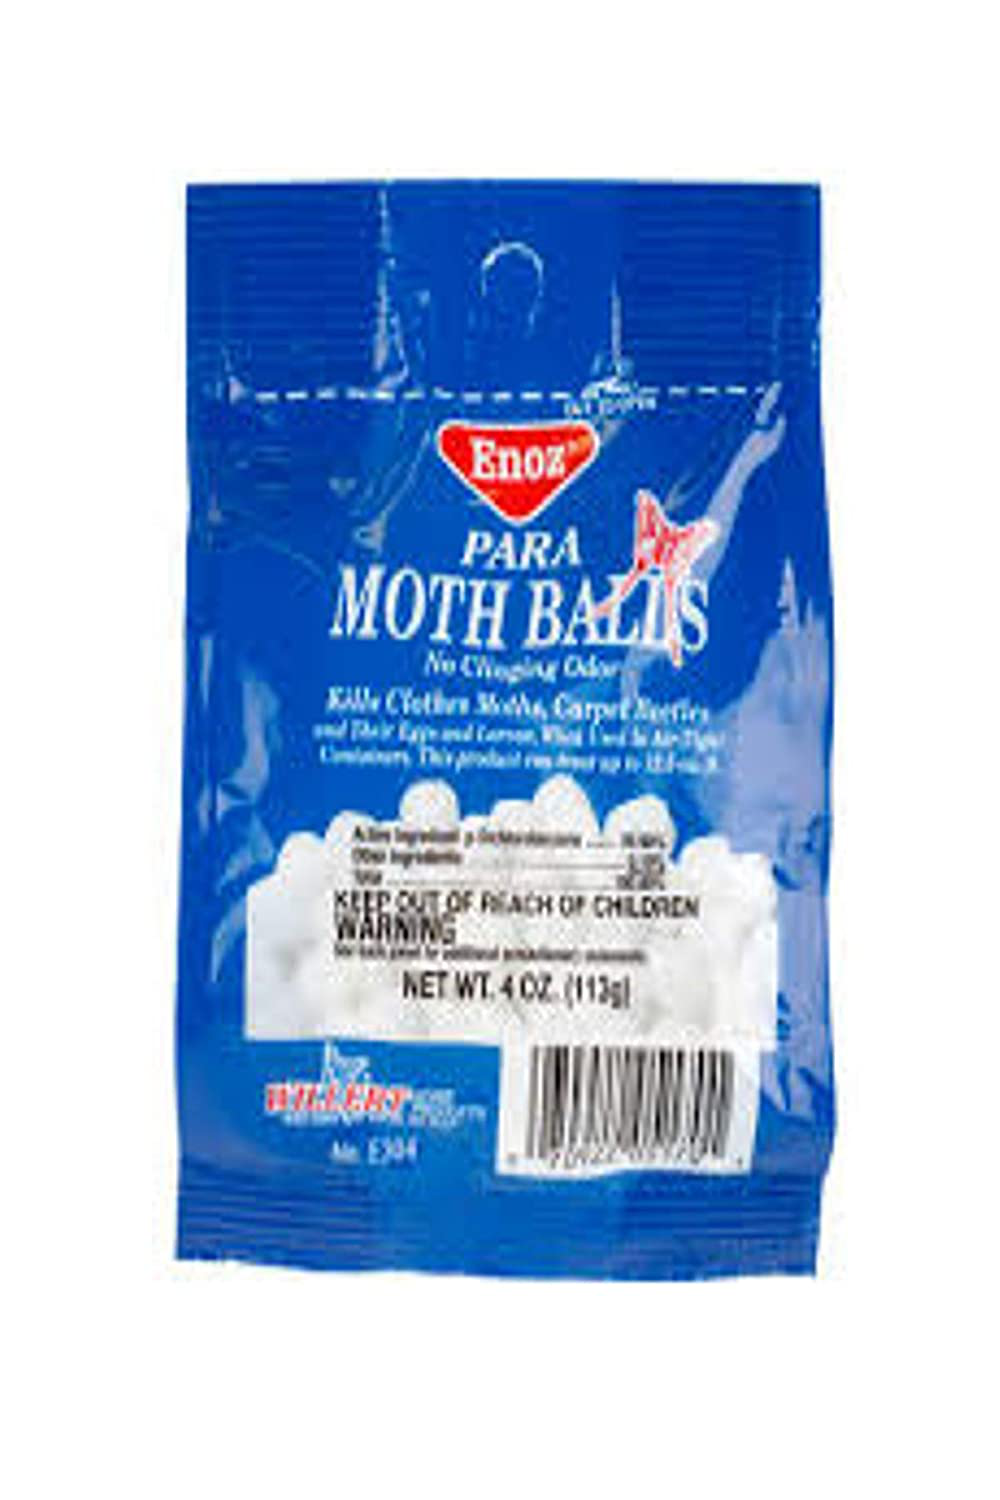 Enoz Moth Balls 4oz, 6-Packages Protects Against Clothes Moths, Carpet Beetles and Their Eggs and Larvae. Moth Killer